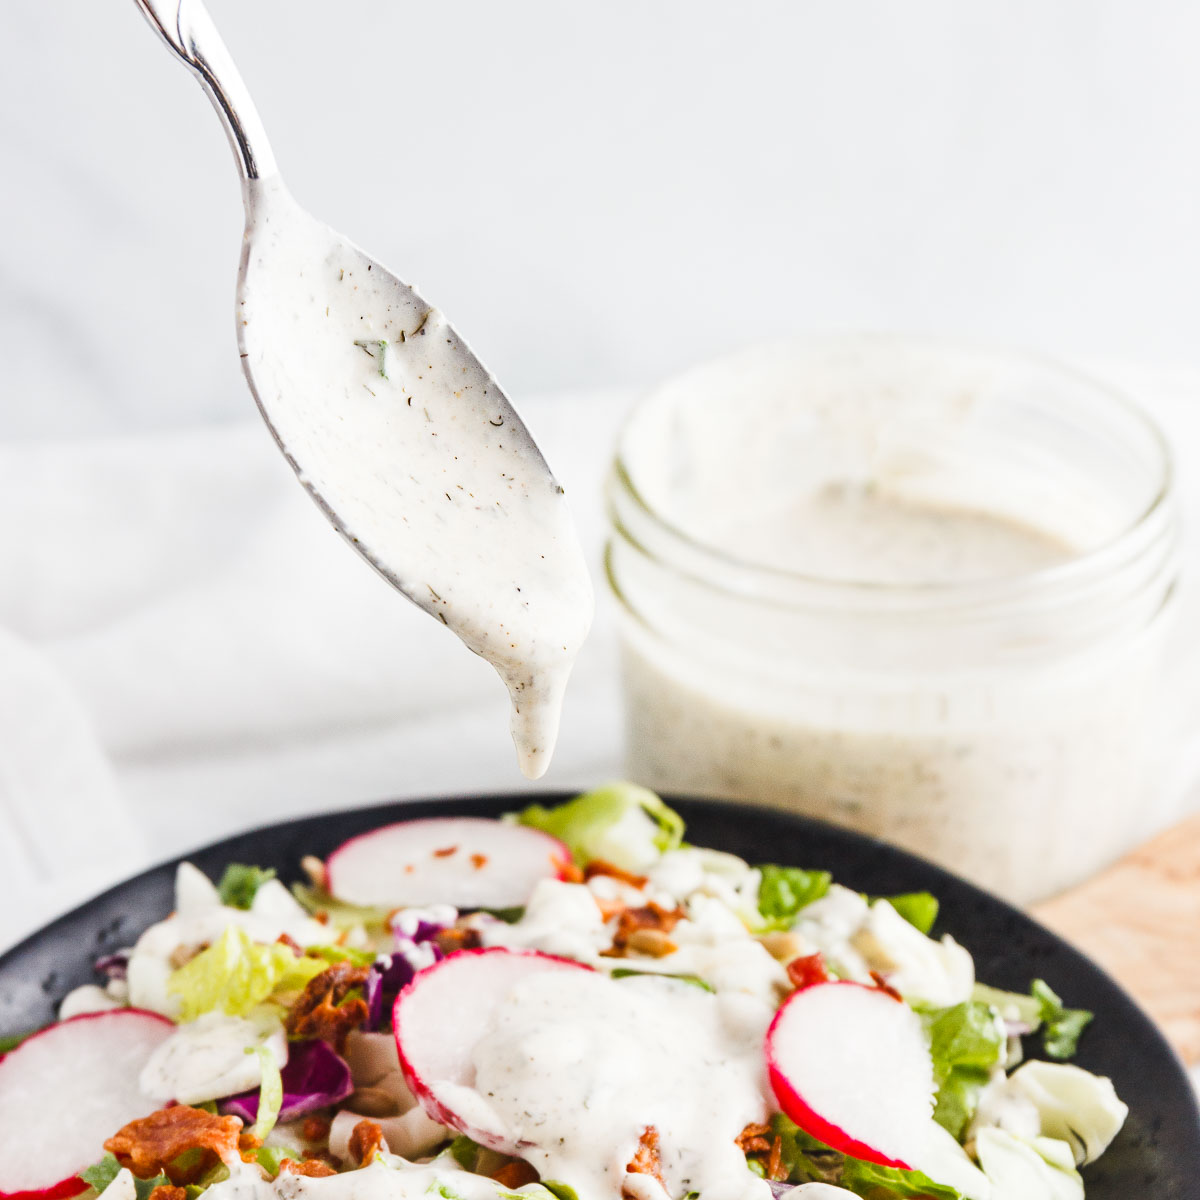 Pouring ranch dressing over a salad.